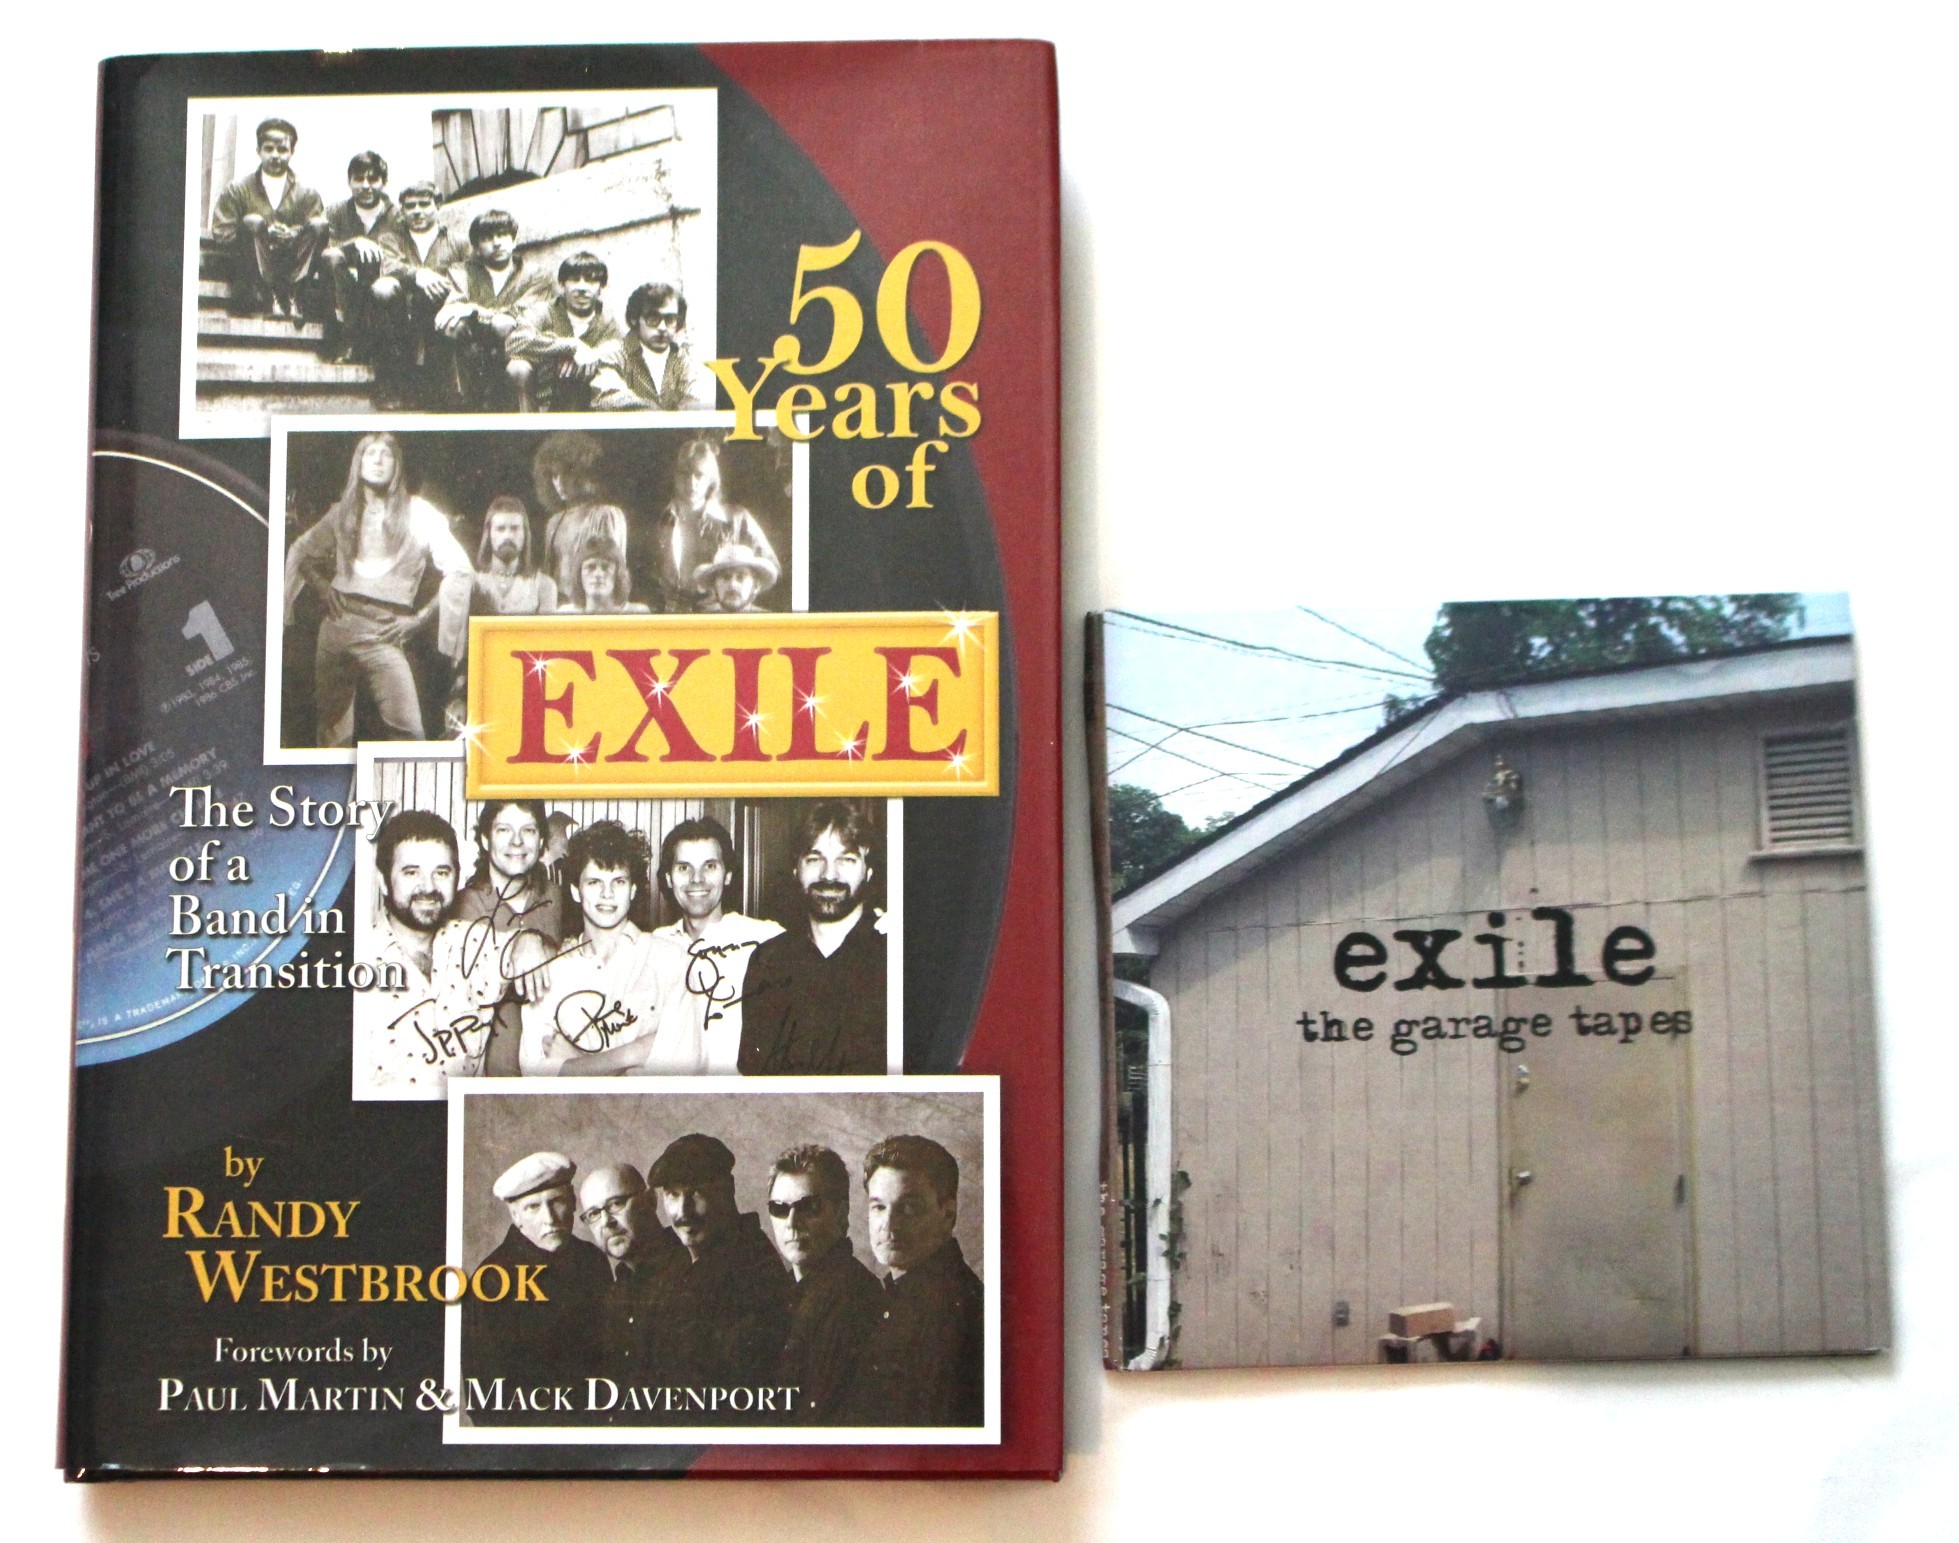 Exile - autographed book with CD "50 Years of Exile: The Story of a Band In Transition"